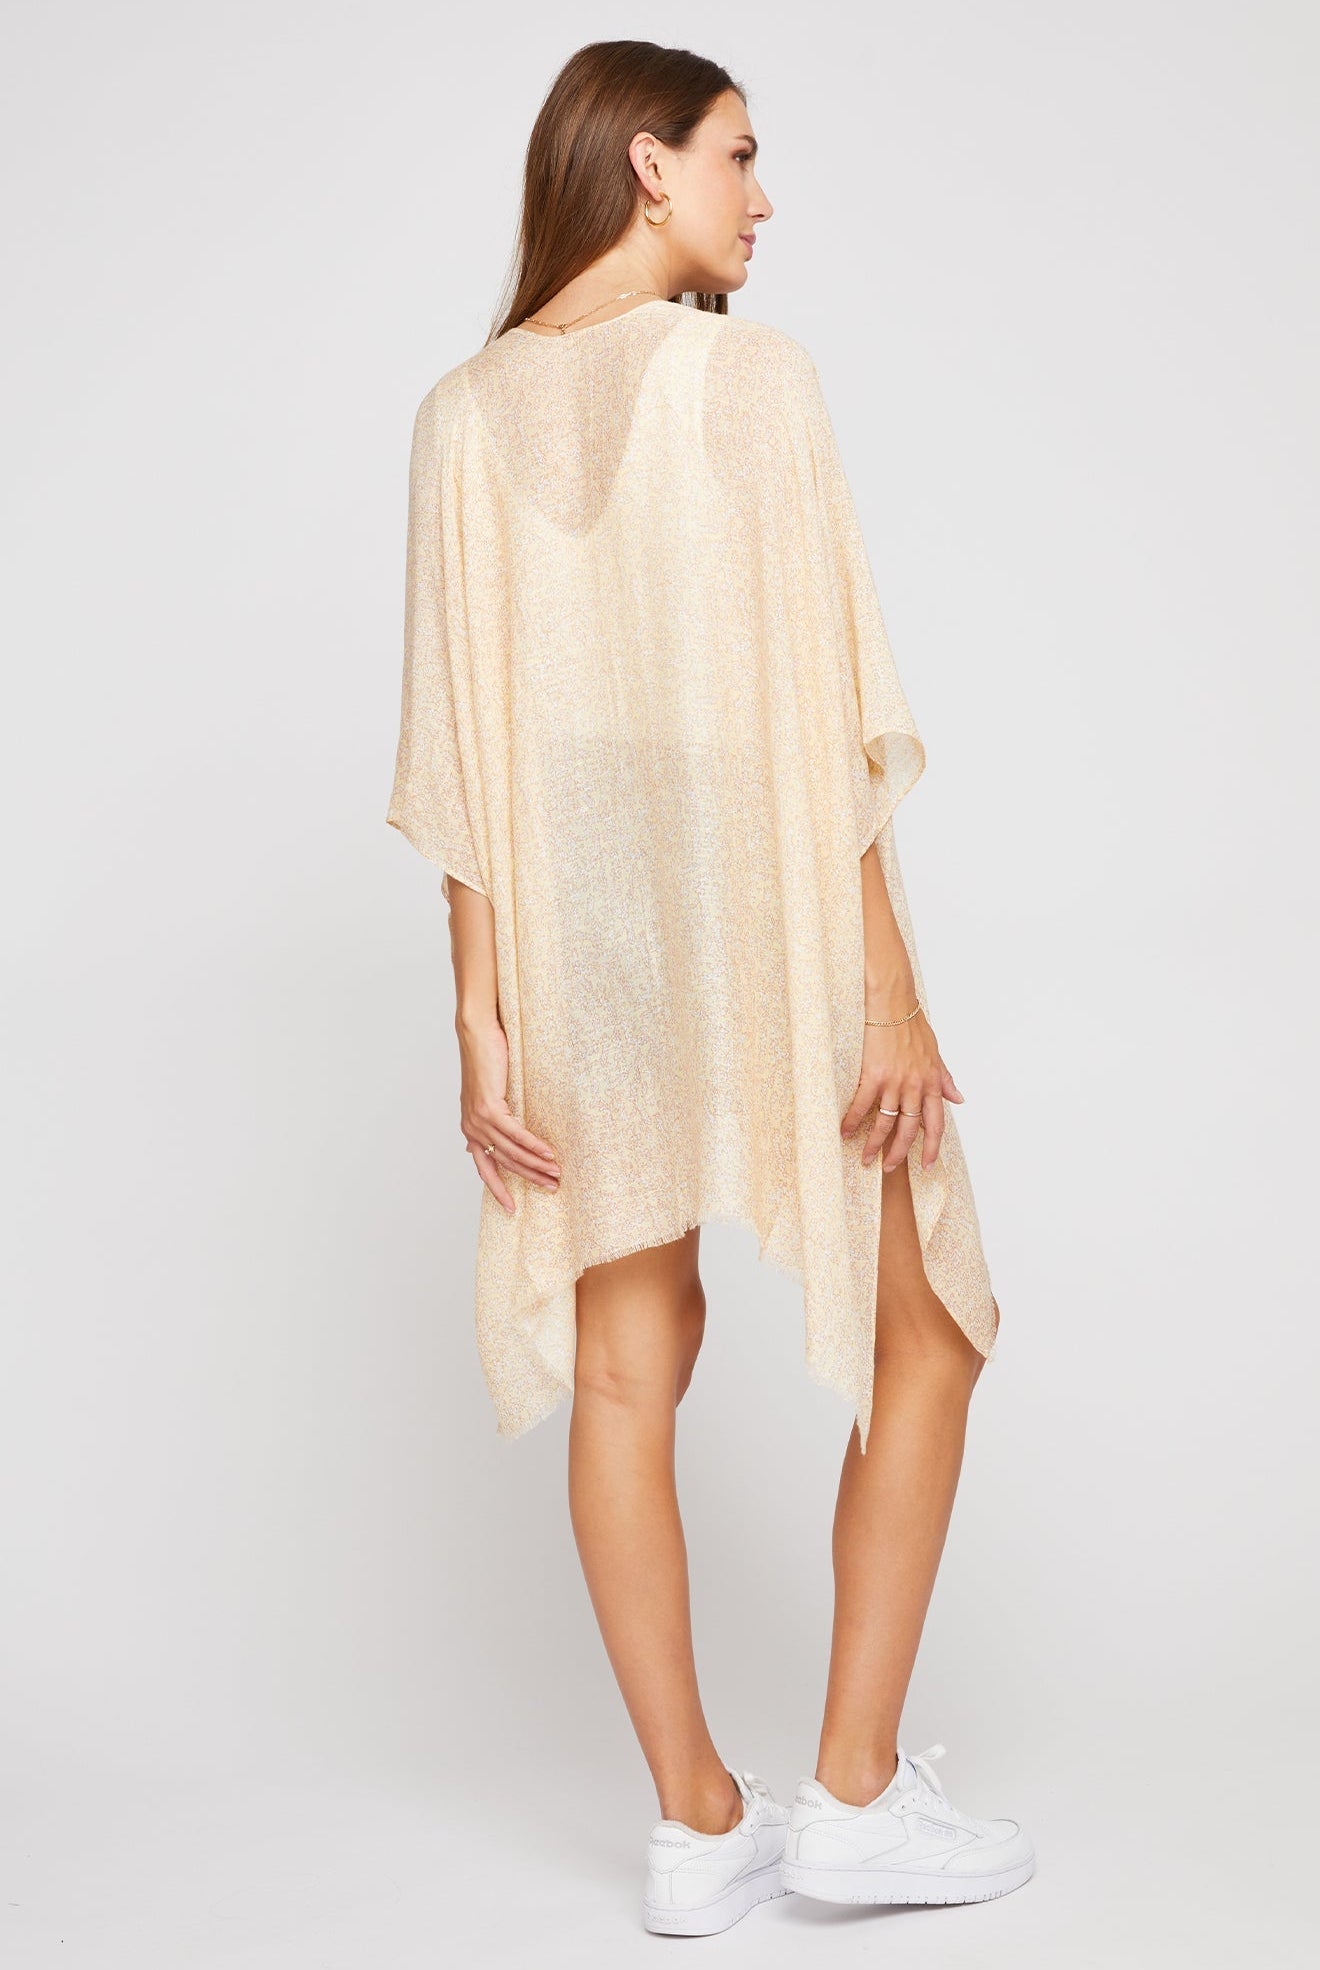 Dawn, Sunlight Cover-Up-Outerwear-Vixen Collection, Day Spa and Women's Boutique Located in Seattle, Washington